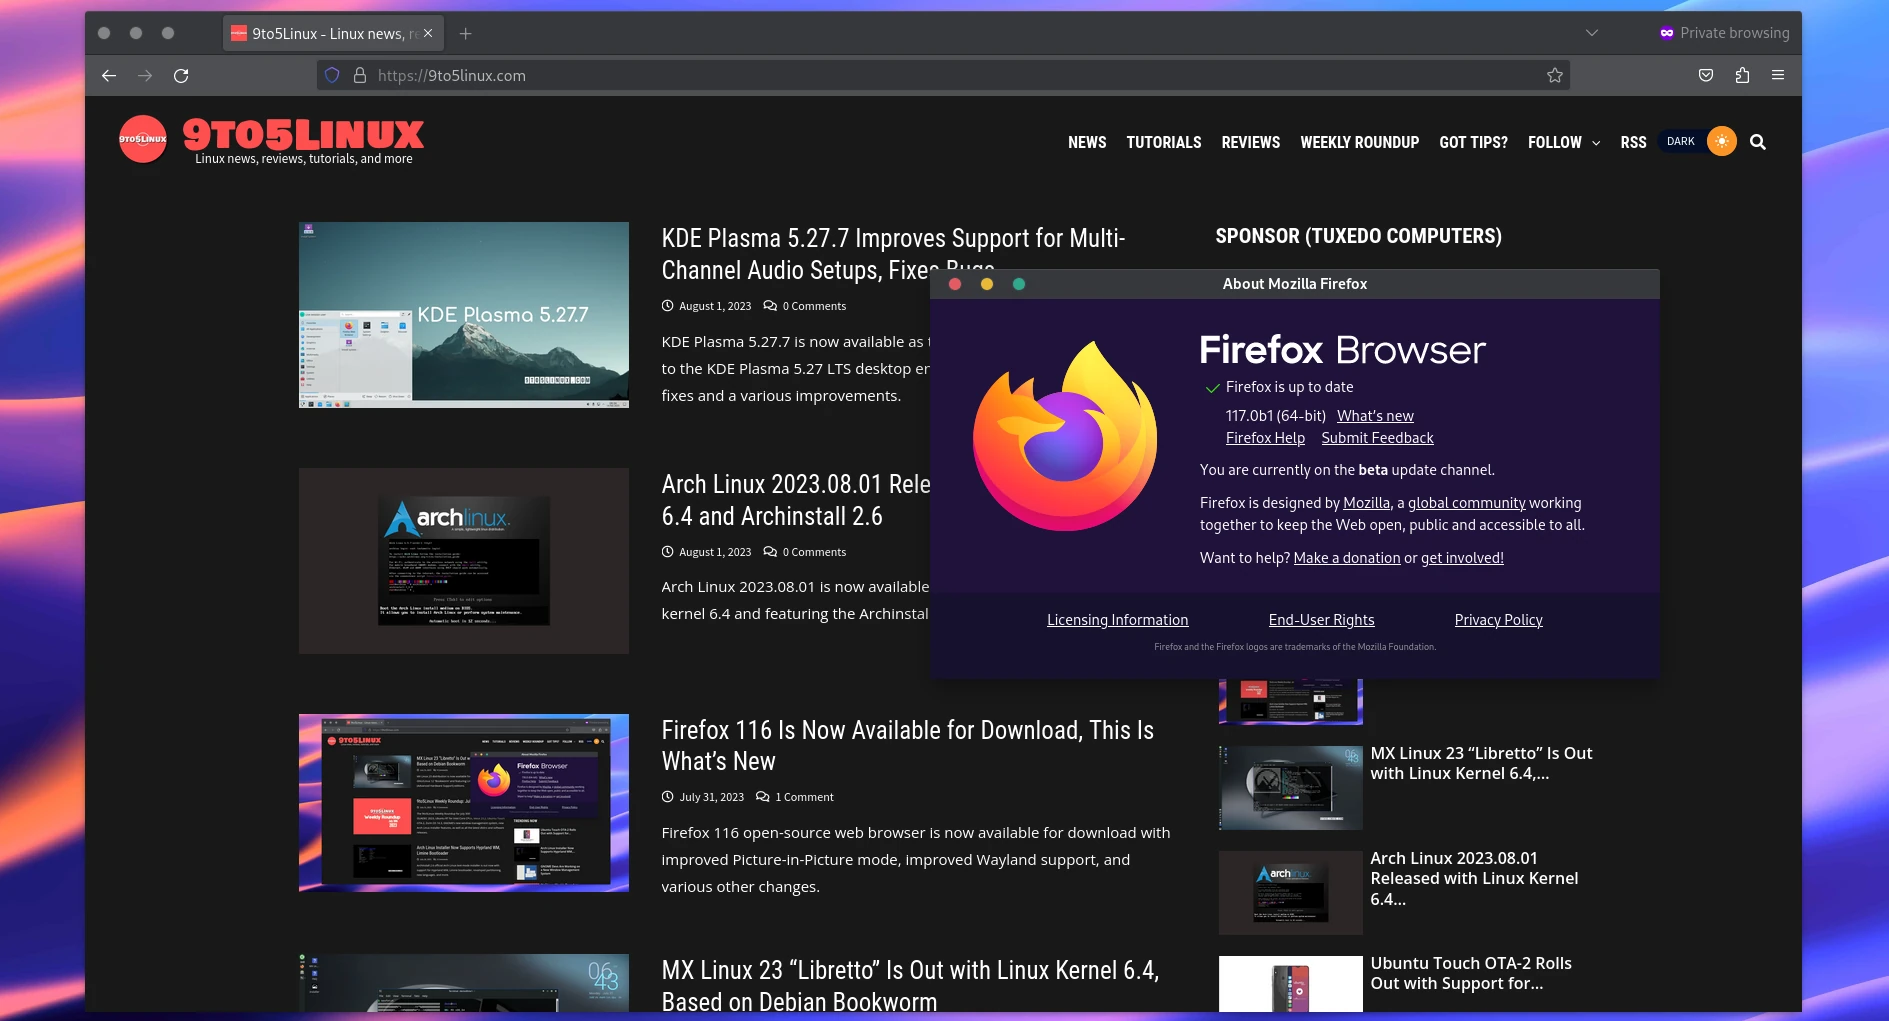 Mozilla Firefox 117 Will Introduce a Built-In, Automatic Translation Feature for Sites